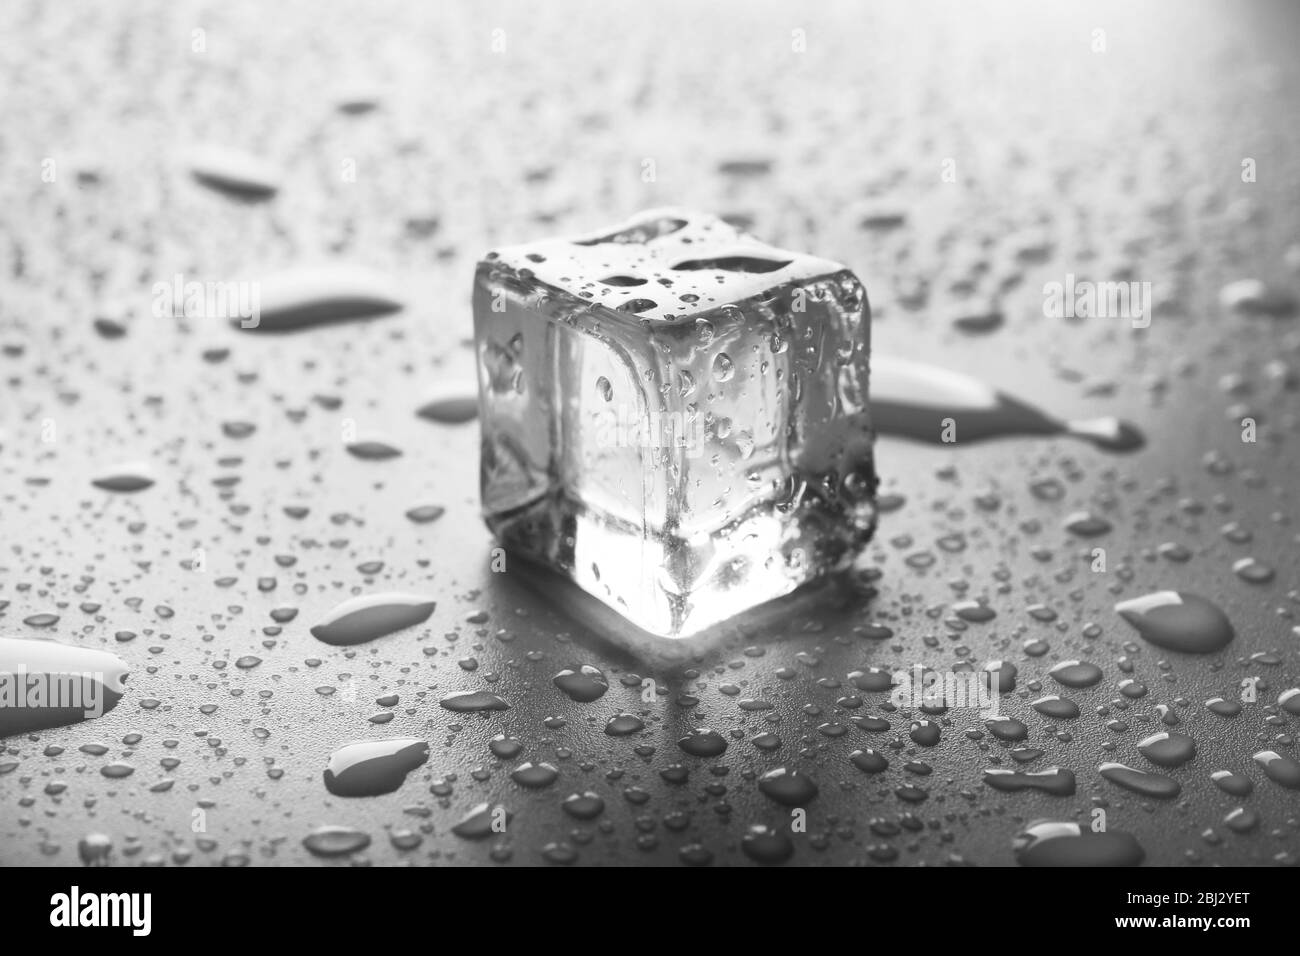 Ice cube Black and White Stock Photos & Images - Alamy